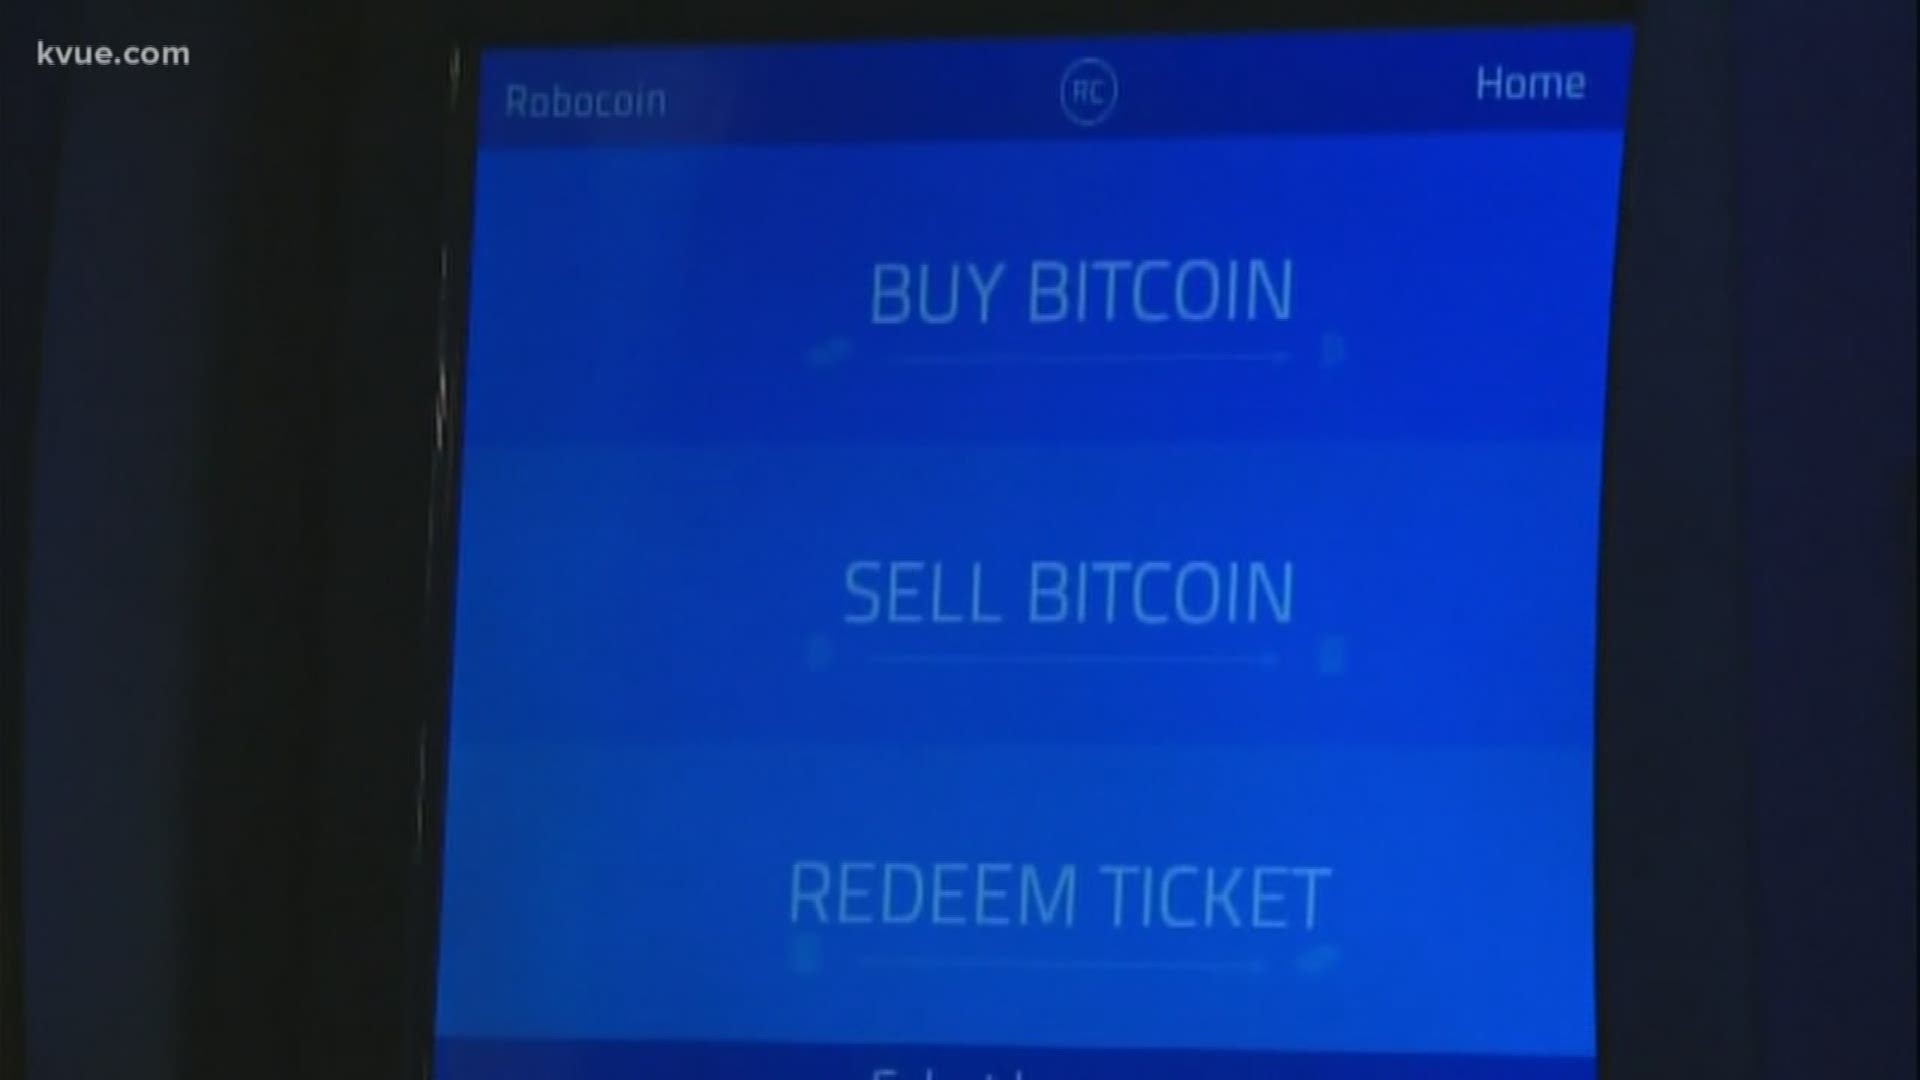 By now you've probably heard of cryptocurrency, like Bitcoin. More than 100,000 merchants worldwide are accepting the form of digital payment -- and KVUE's Erin Jones shows us that includes Austin real estate companies.